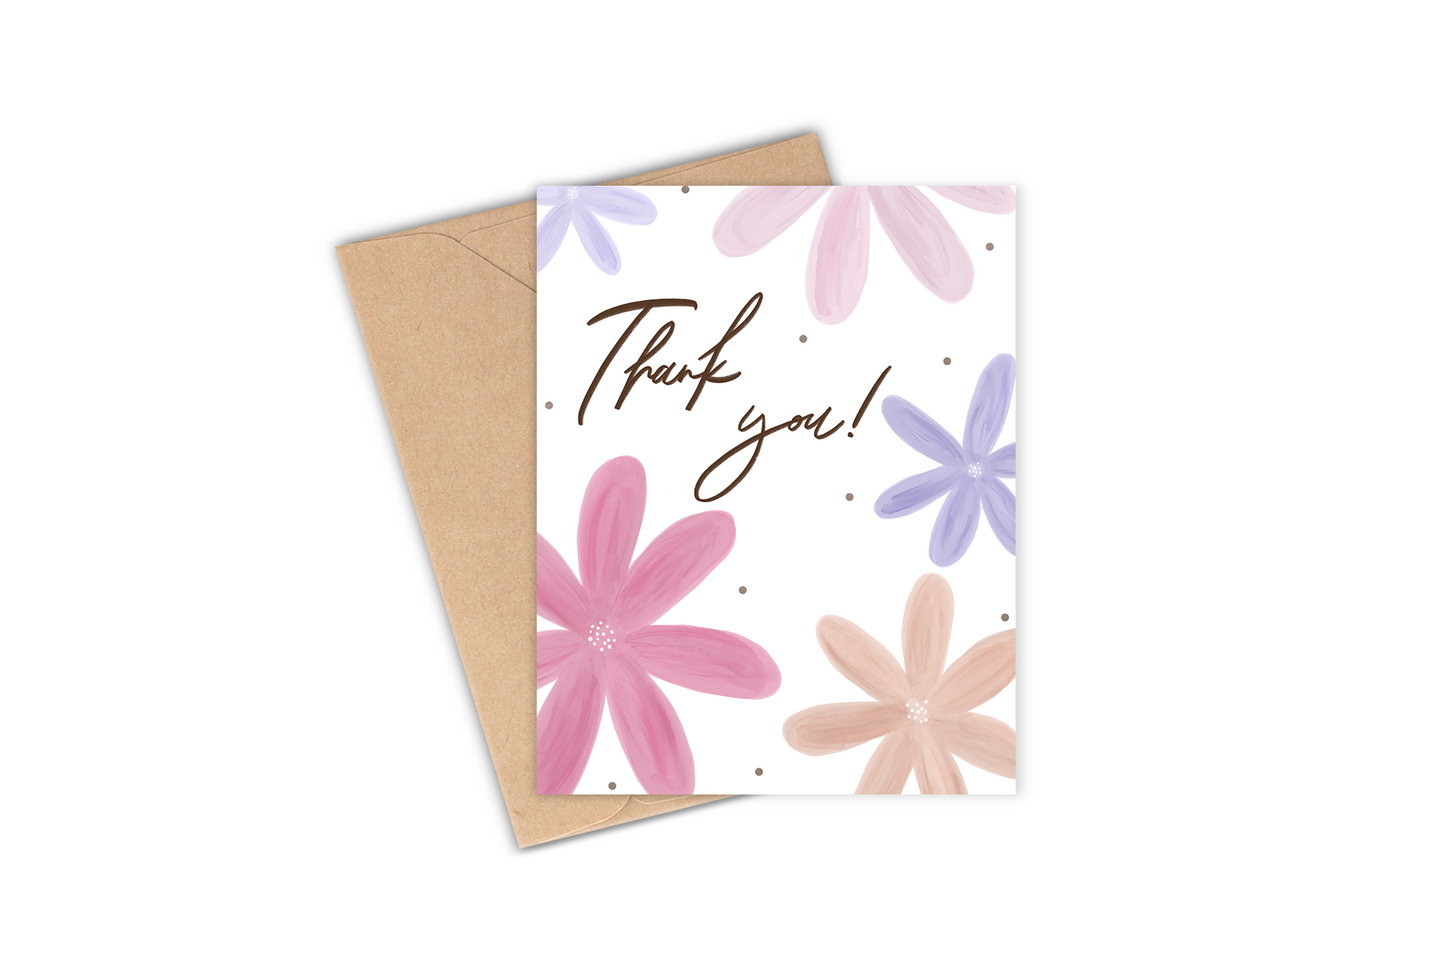 The perfect thank you cards to have on hand for any occasion! This greeting card features hand-drawn flowers with the phrase "Thank you!"  Simple, versatile, and ready for you to write a special note inside!